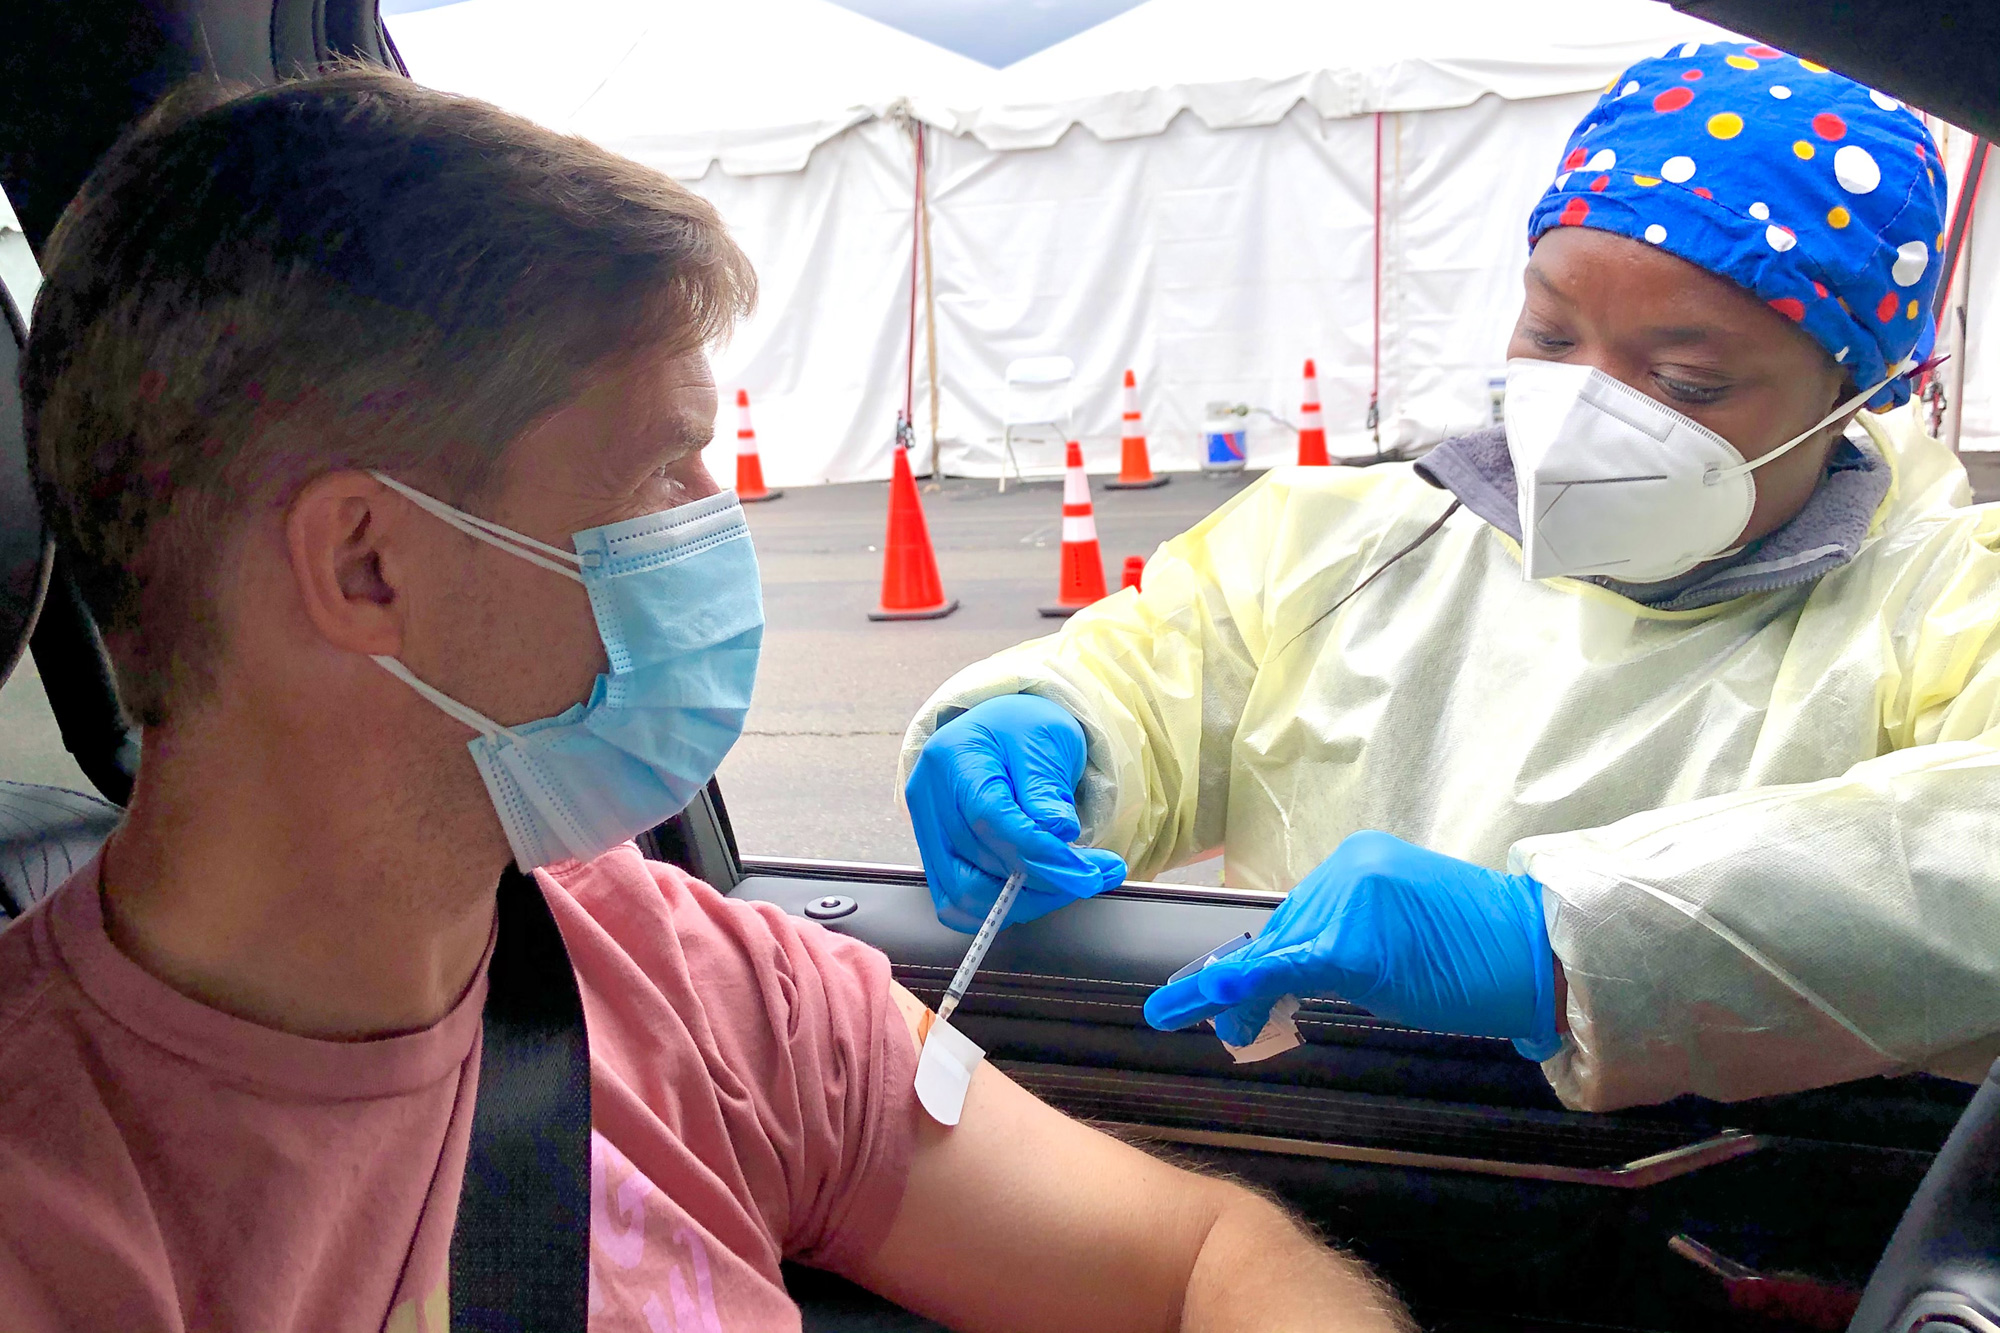 A young, Black female healthcare professional wearing PPE administers a COVID-19 vaccine injection to a middle-aged white male through his vehicle's window.